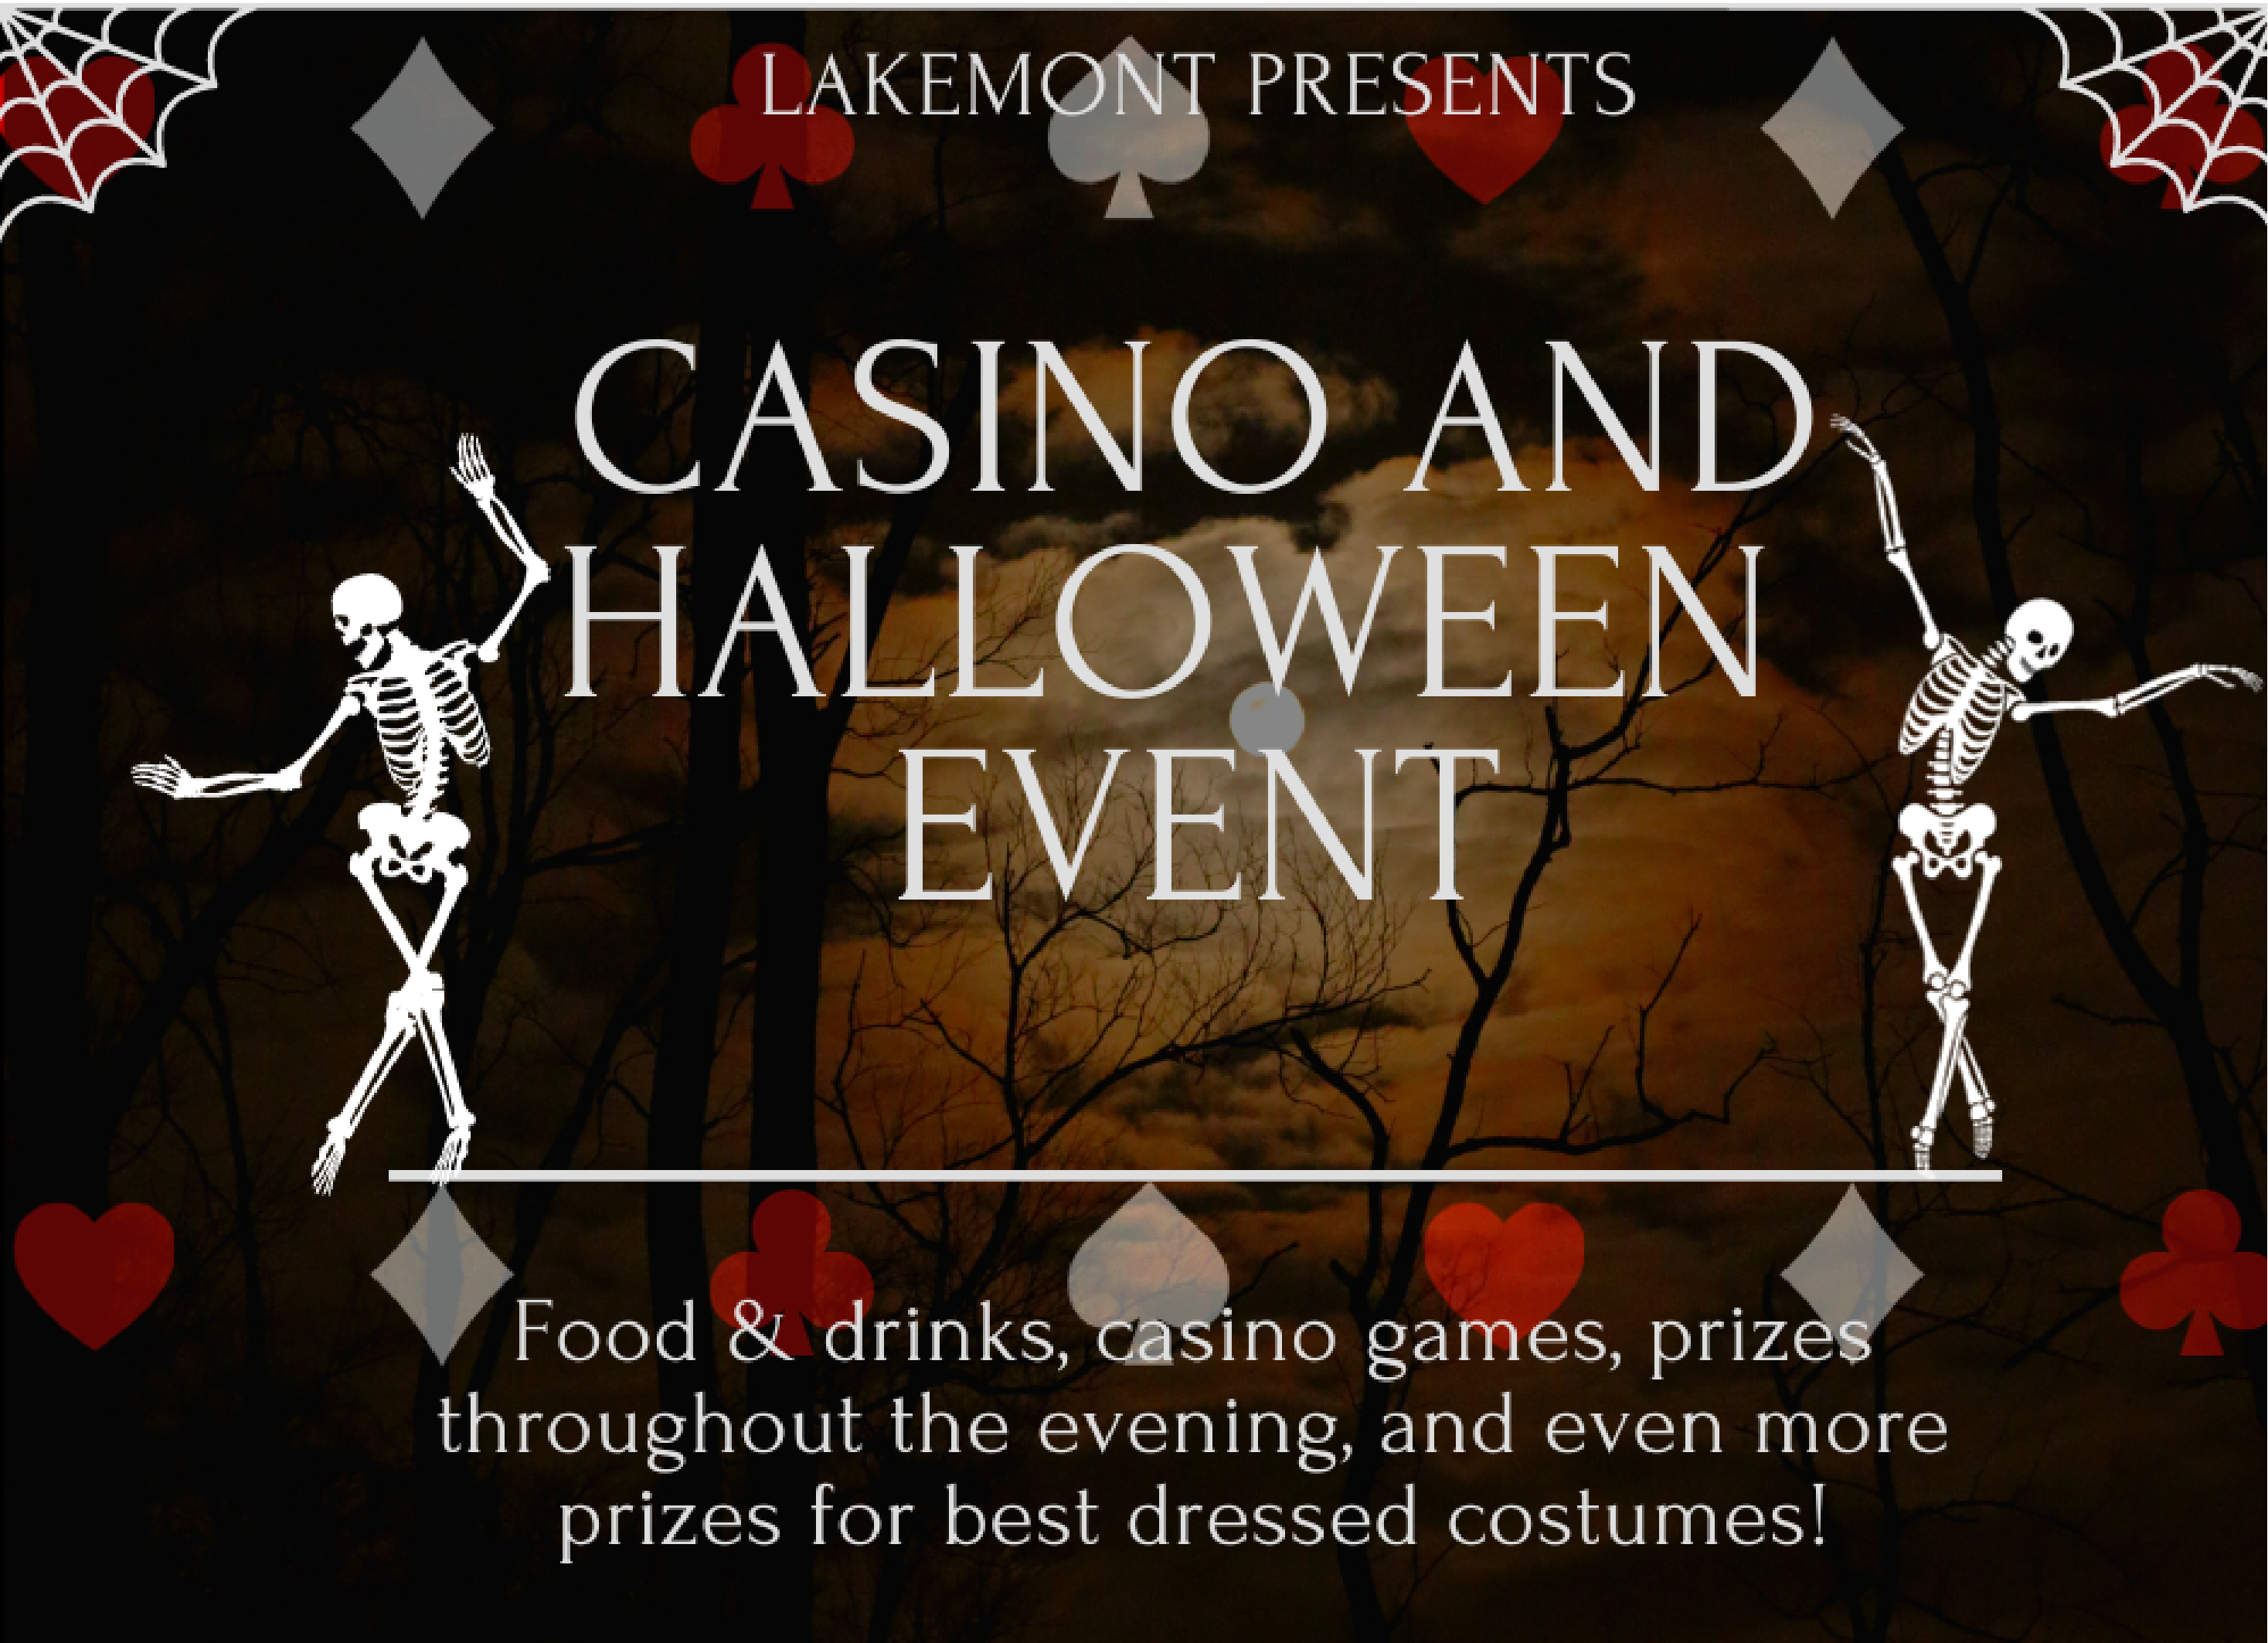 Lakemont to Host Casino & Halloween Event on October 28